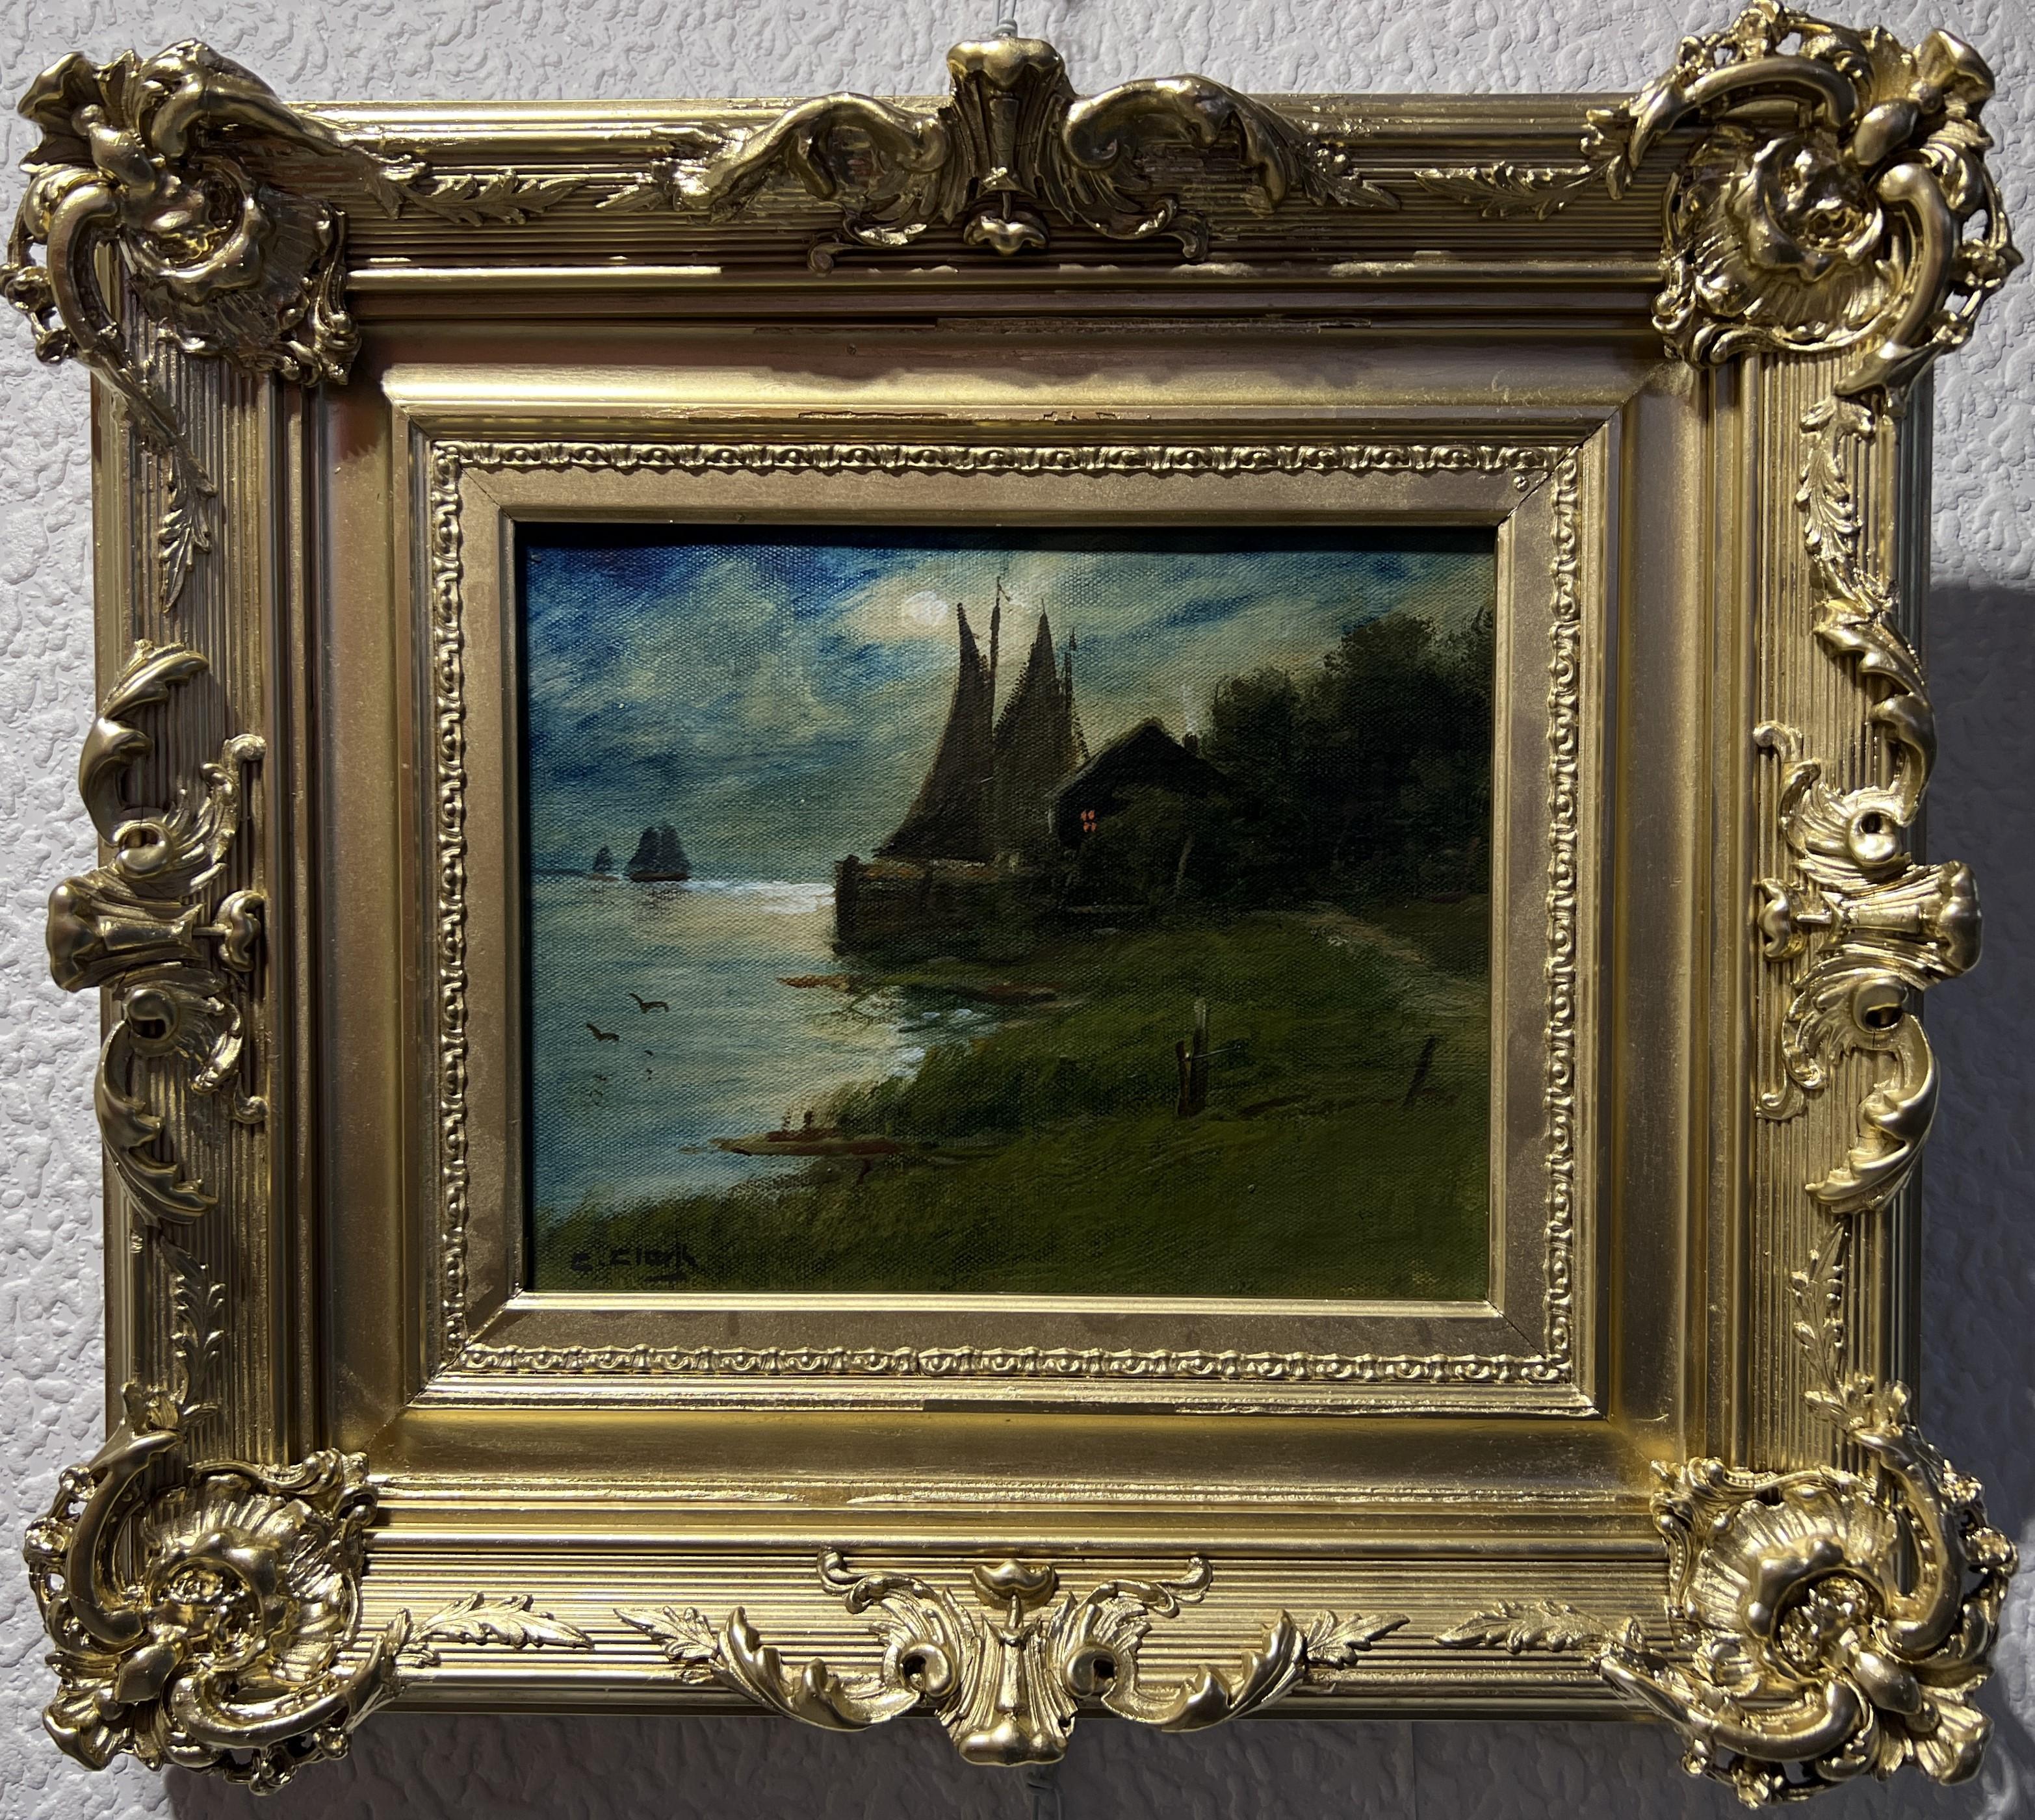 Up for sale is an original antique painting on canvas depicting a maritime landscape set during what appears to be the late hours of the afternoon or early evening, given the darkening sky. A solitary structure dominates the right side of the